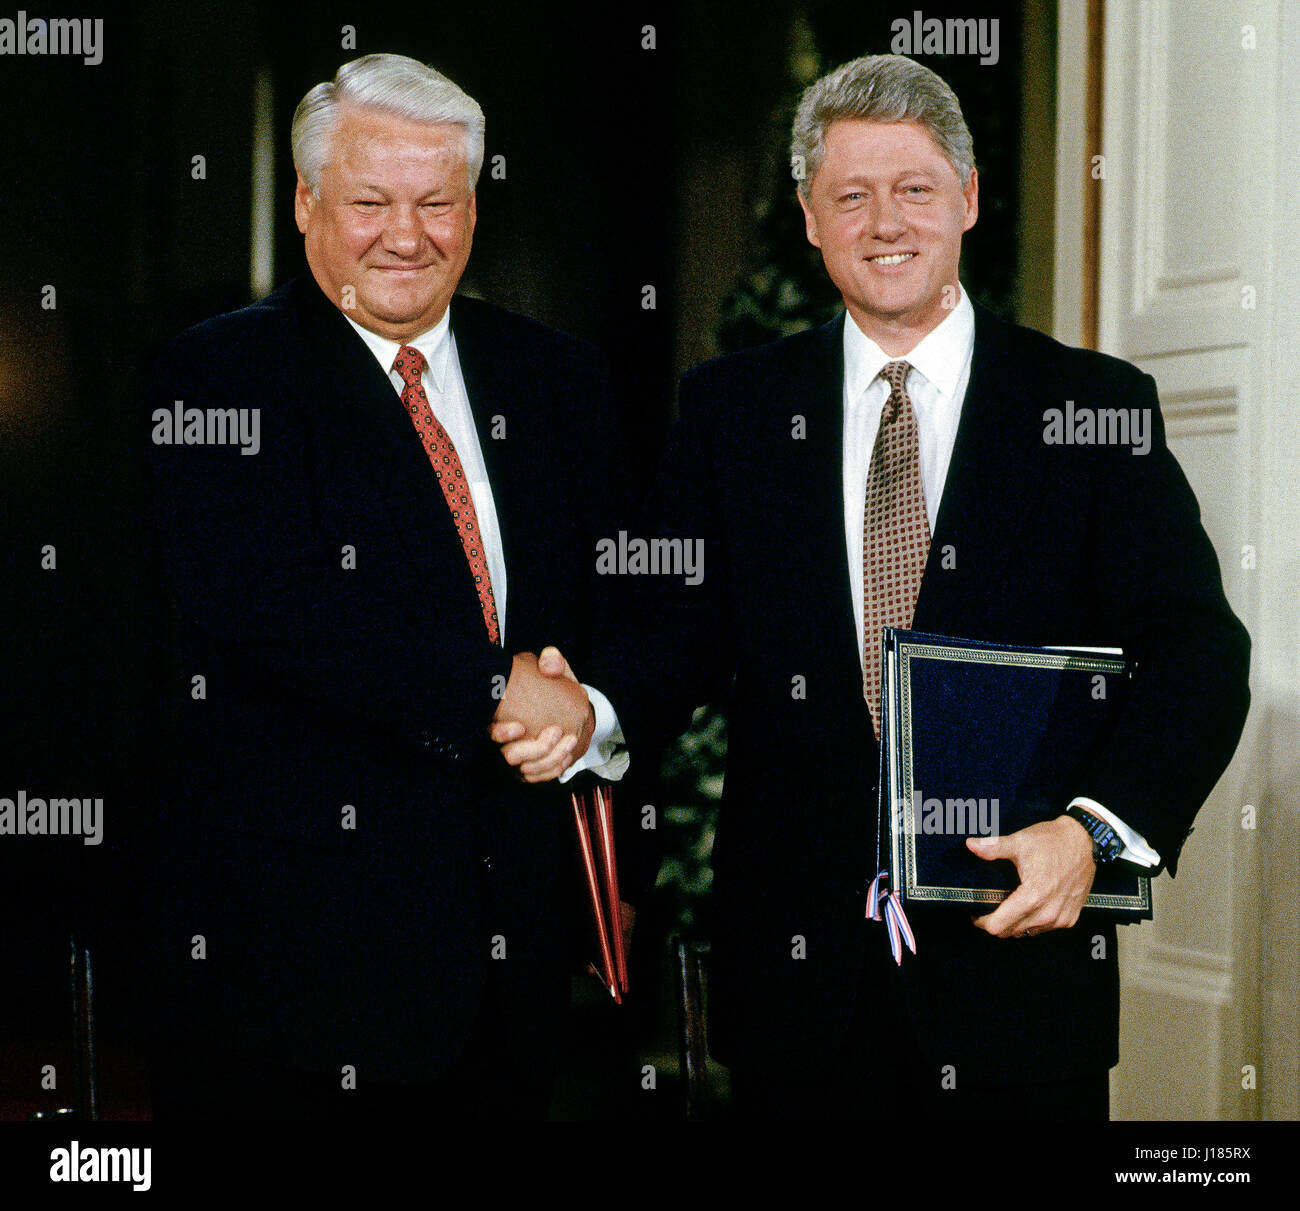 Russian President Boris Yeltsin and President William Clinton following the end of two days of summit meetings and signing an agreement to normalize economic relations with the United States shake hands at the conclusion of a joint new conference in the East Room of the White House, Washington DC., September 28, 1994. Photo by Mark Reinstein Stock Photo